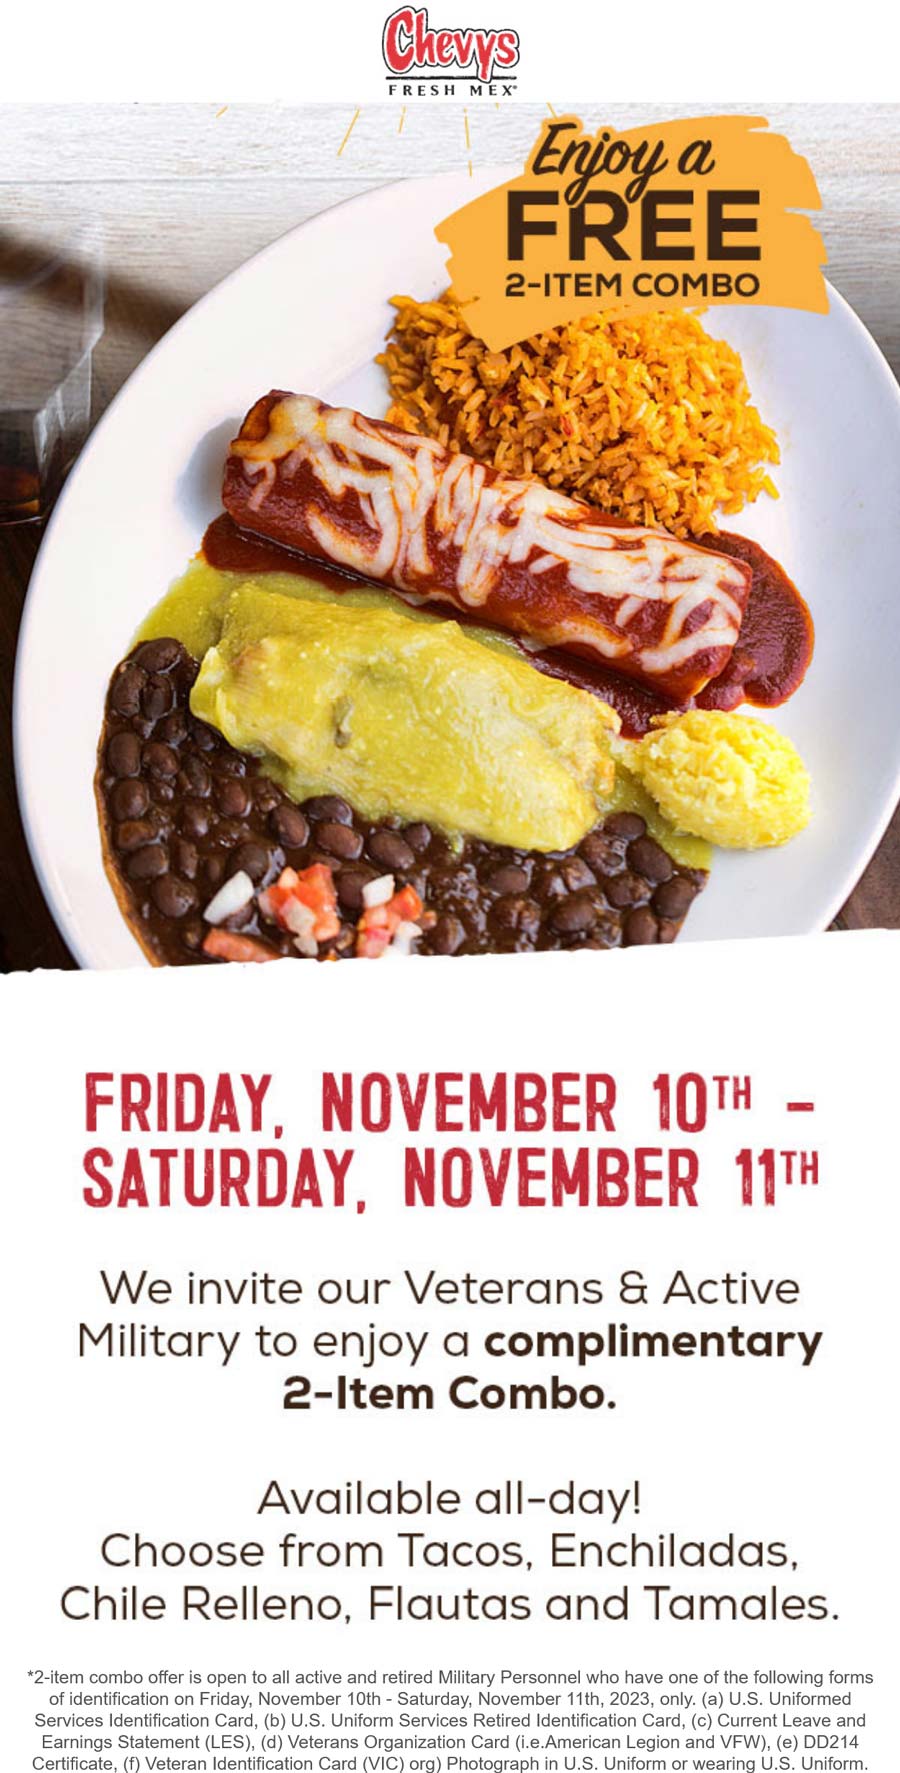 Active & retired military enjoy a free 2-item combo meal thru Saturday at Chevys Fresh Mex #chevys